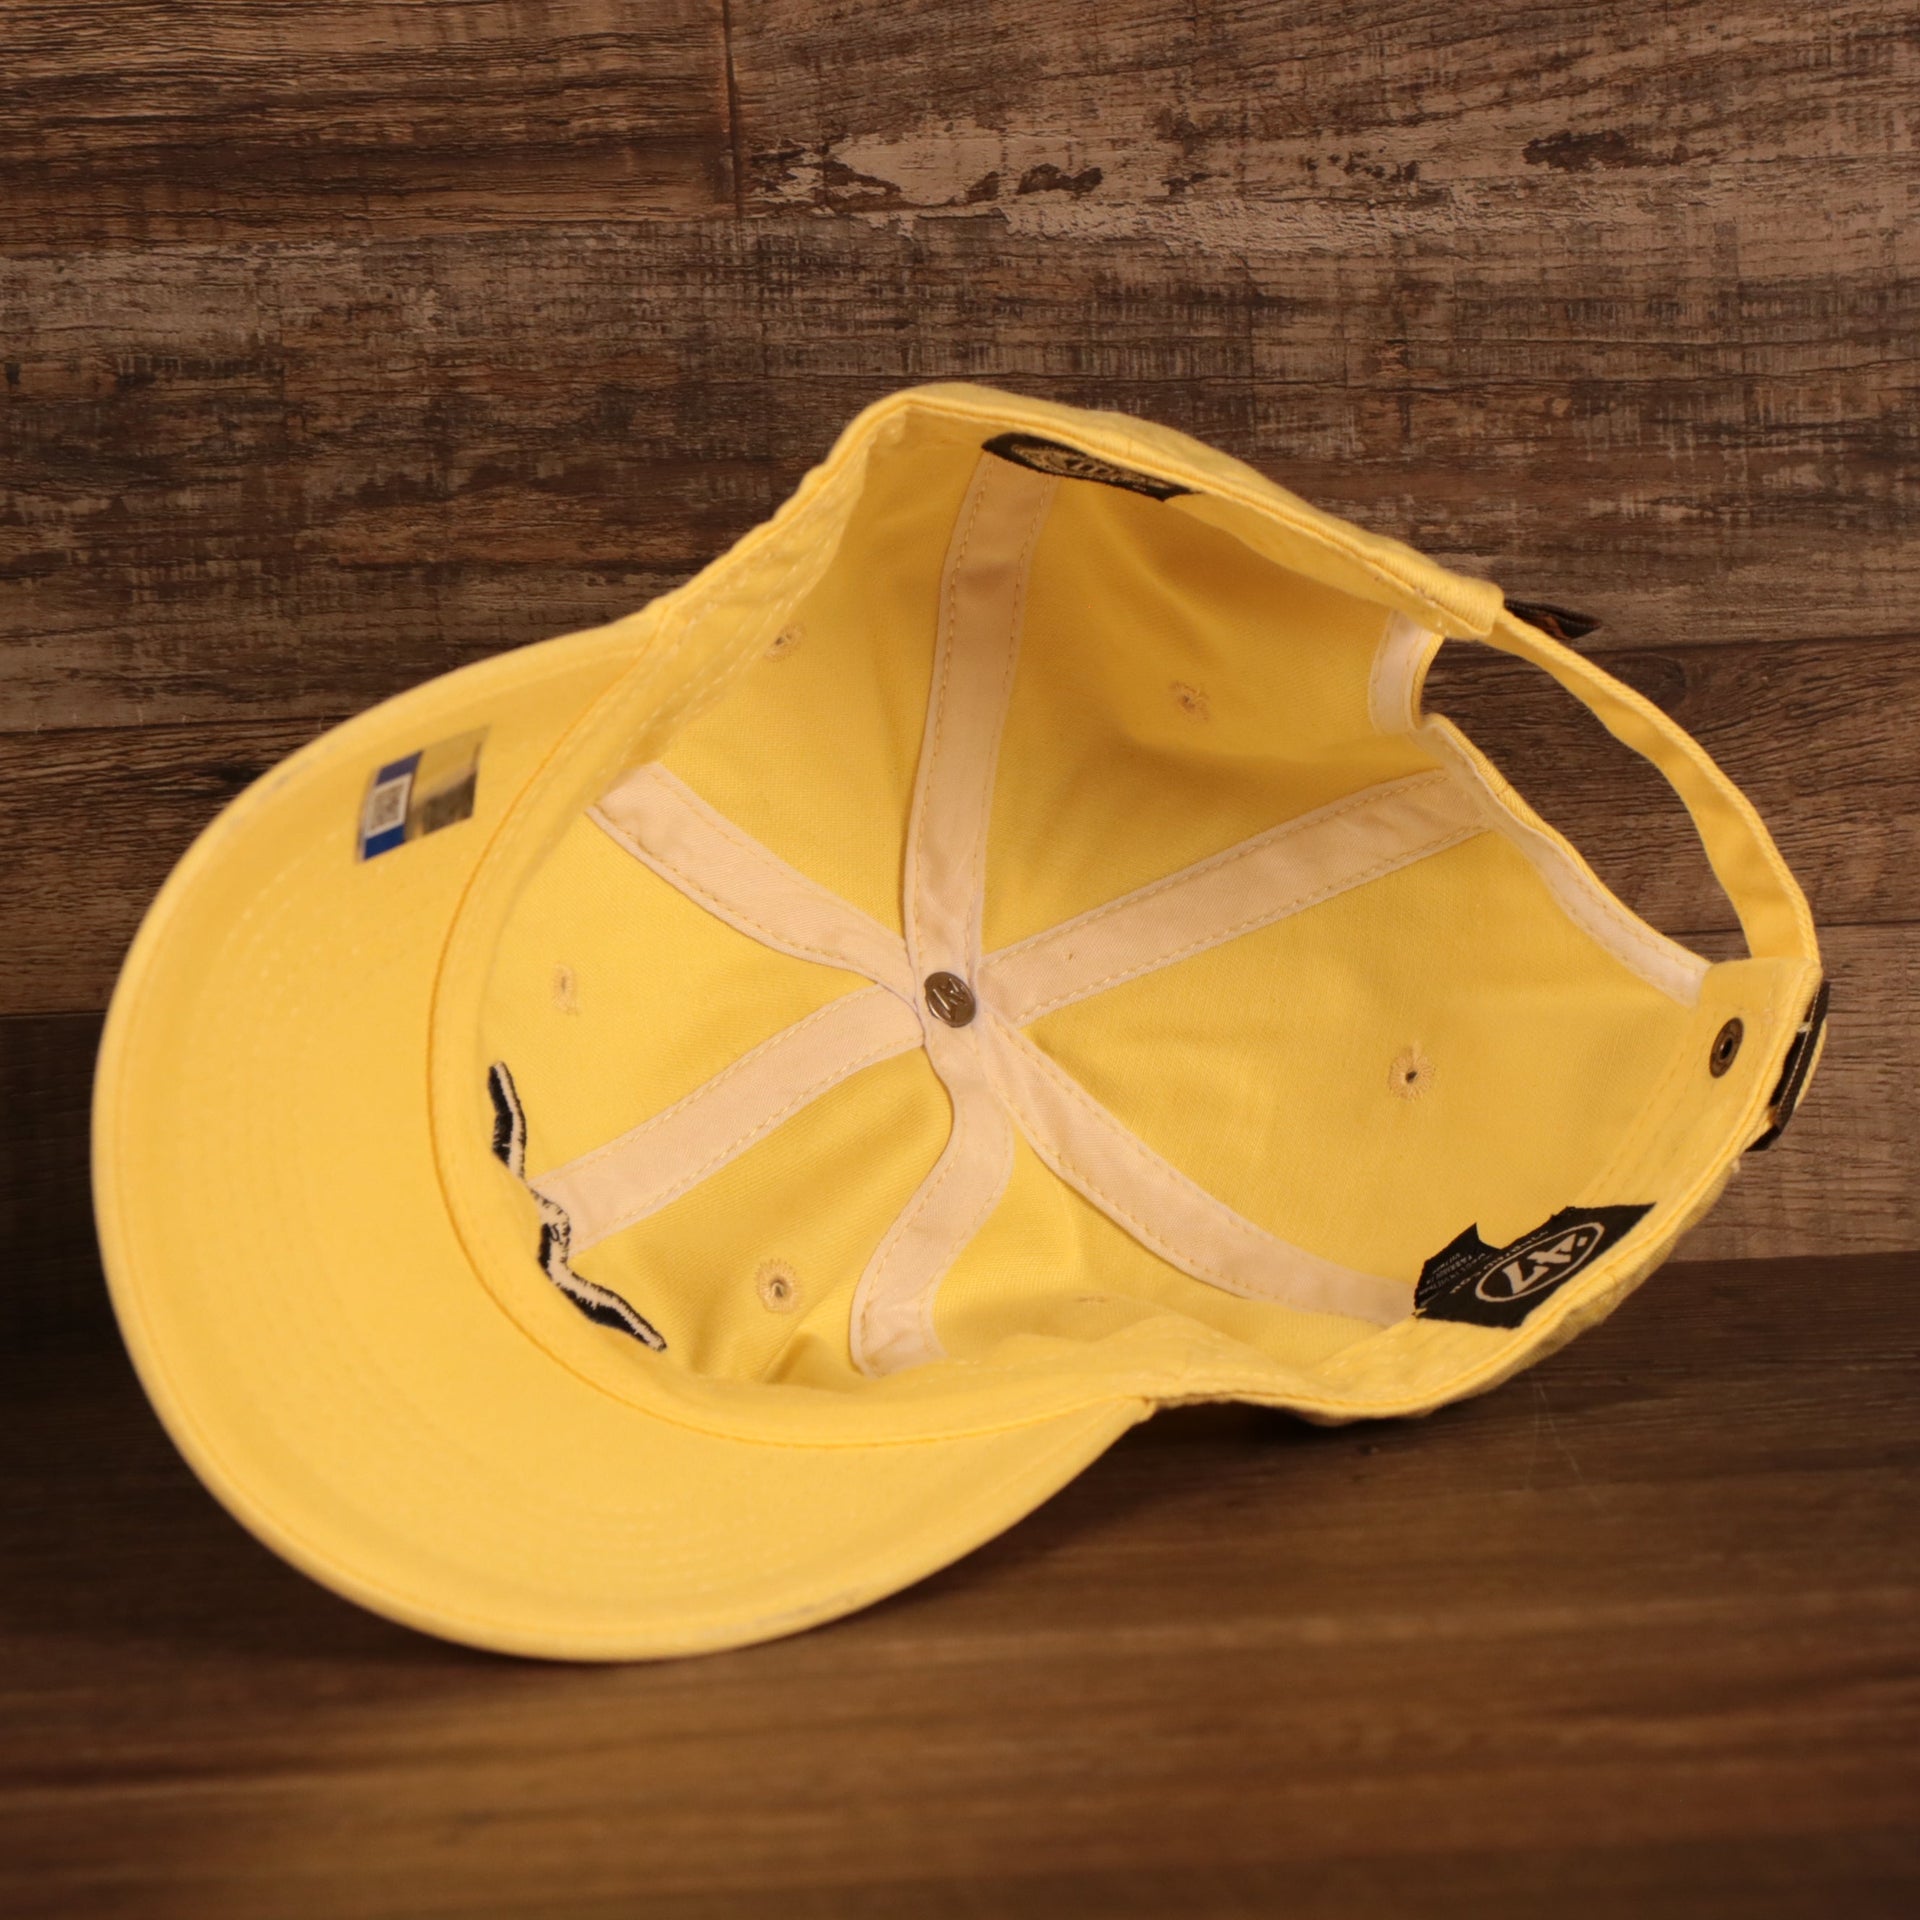 47 BRAND | DAD HAT | WEST VIRGINIA MOUNTAINEERS | CLEAN UP 47 STRAP BACK ADJUSTABLE WOMEN | MAIZE YELLOW